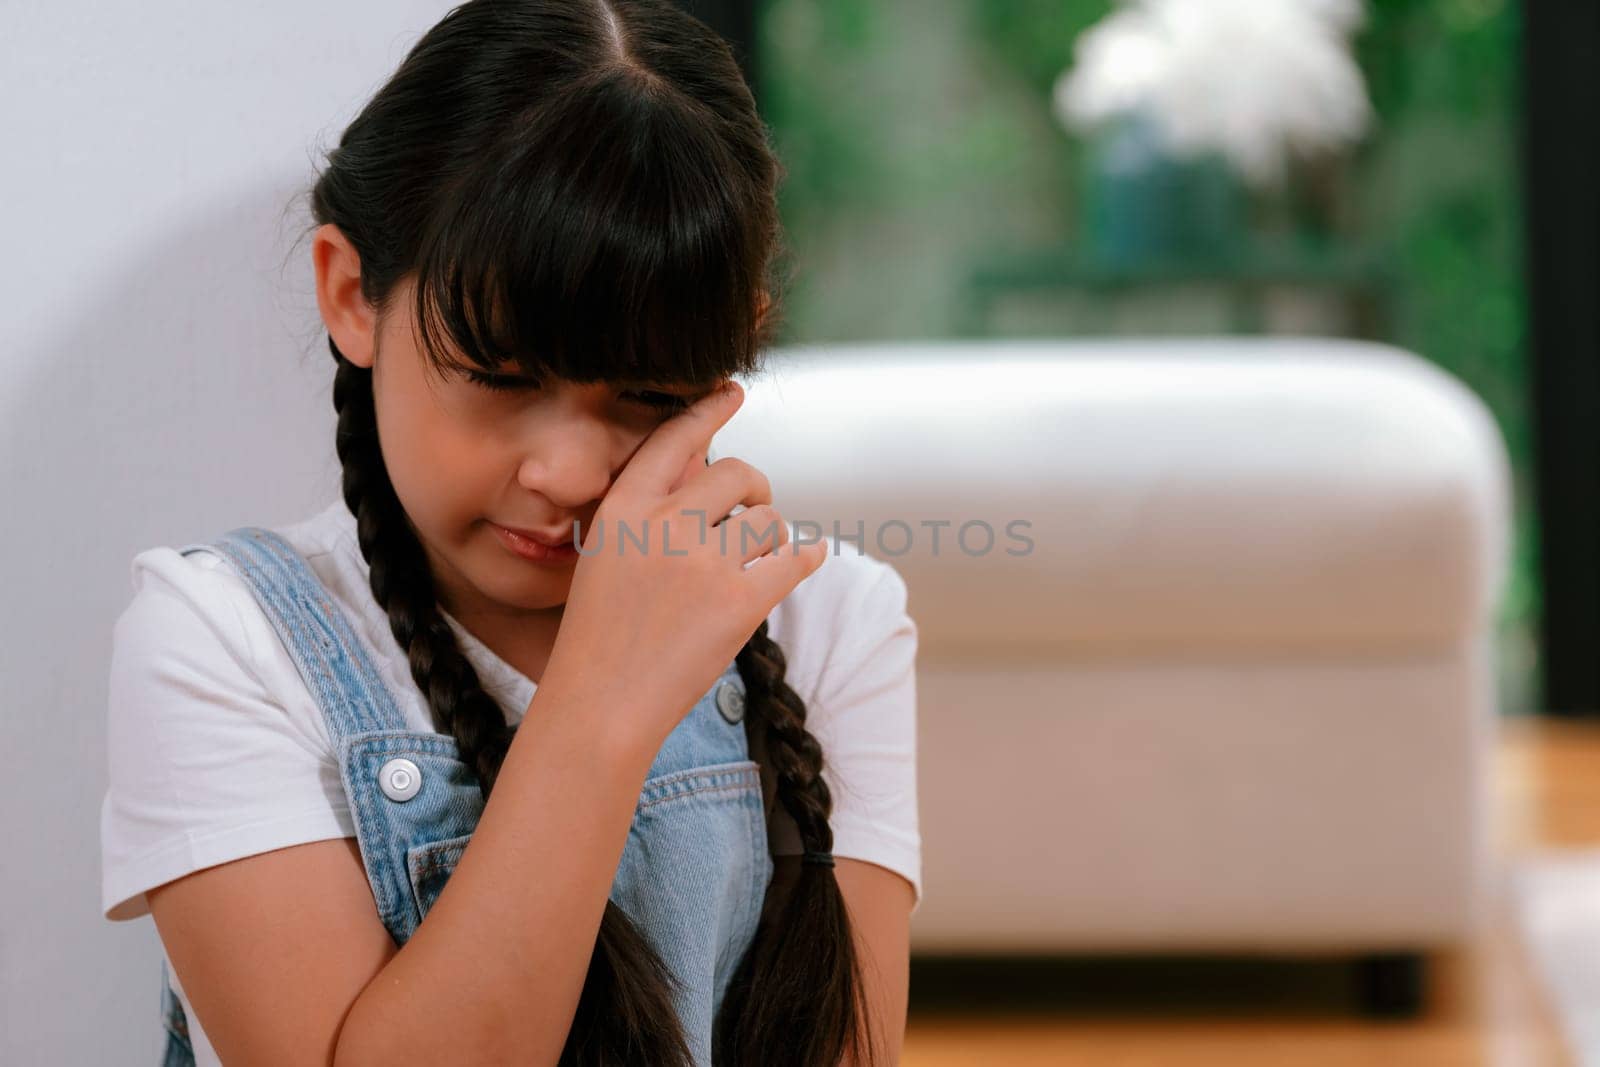 Sad little girl sitting alone in living room crying, feeling lonely. Young girl experiencing social isolation punishment or neglect from parent led to anxiety and traumatic in childhood. Synchronos